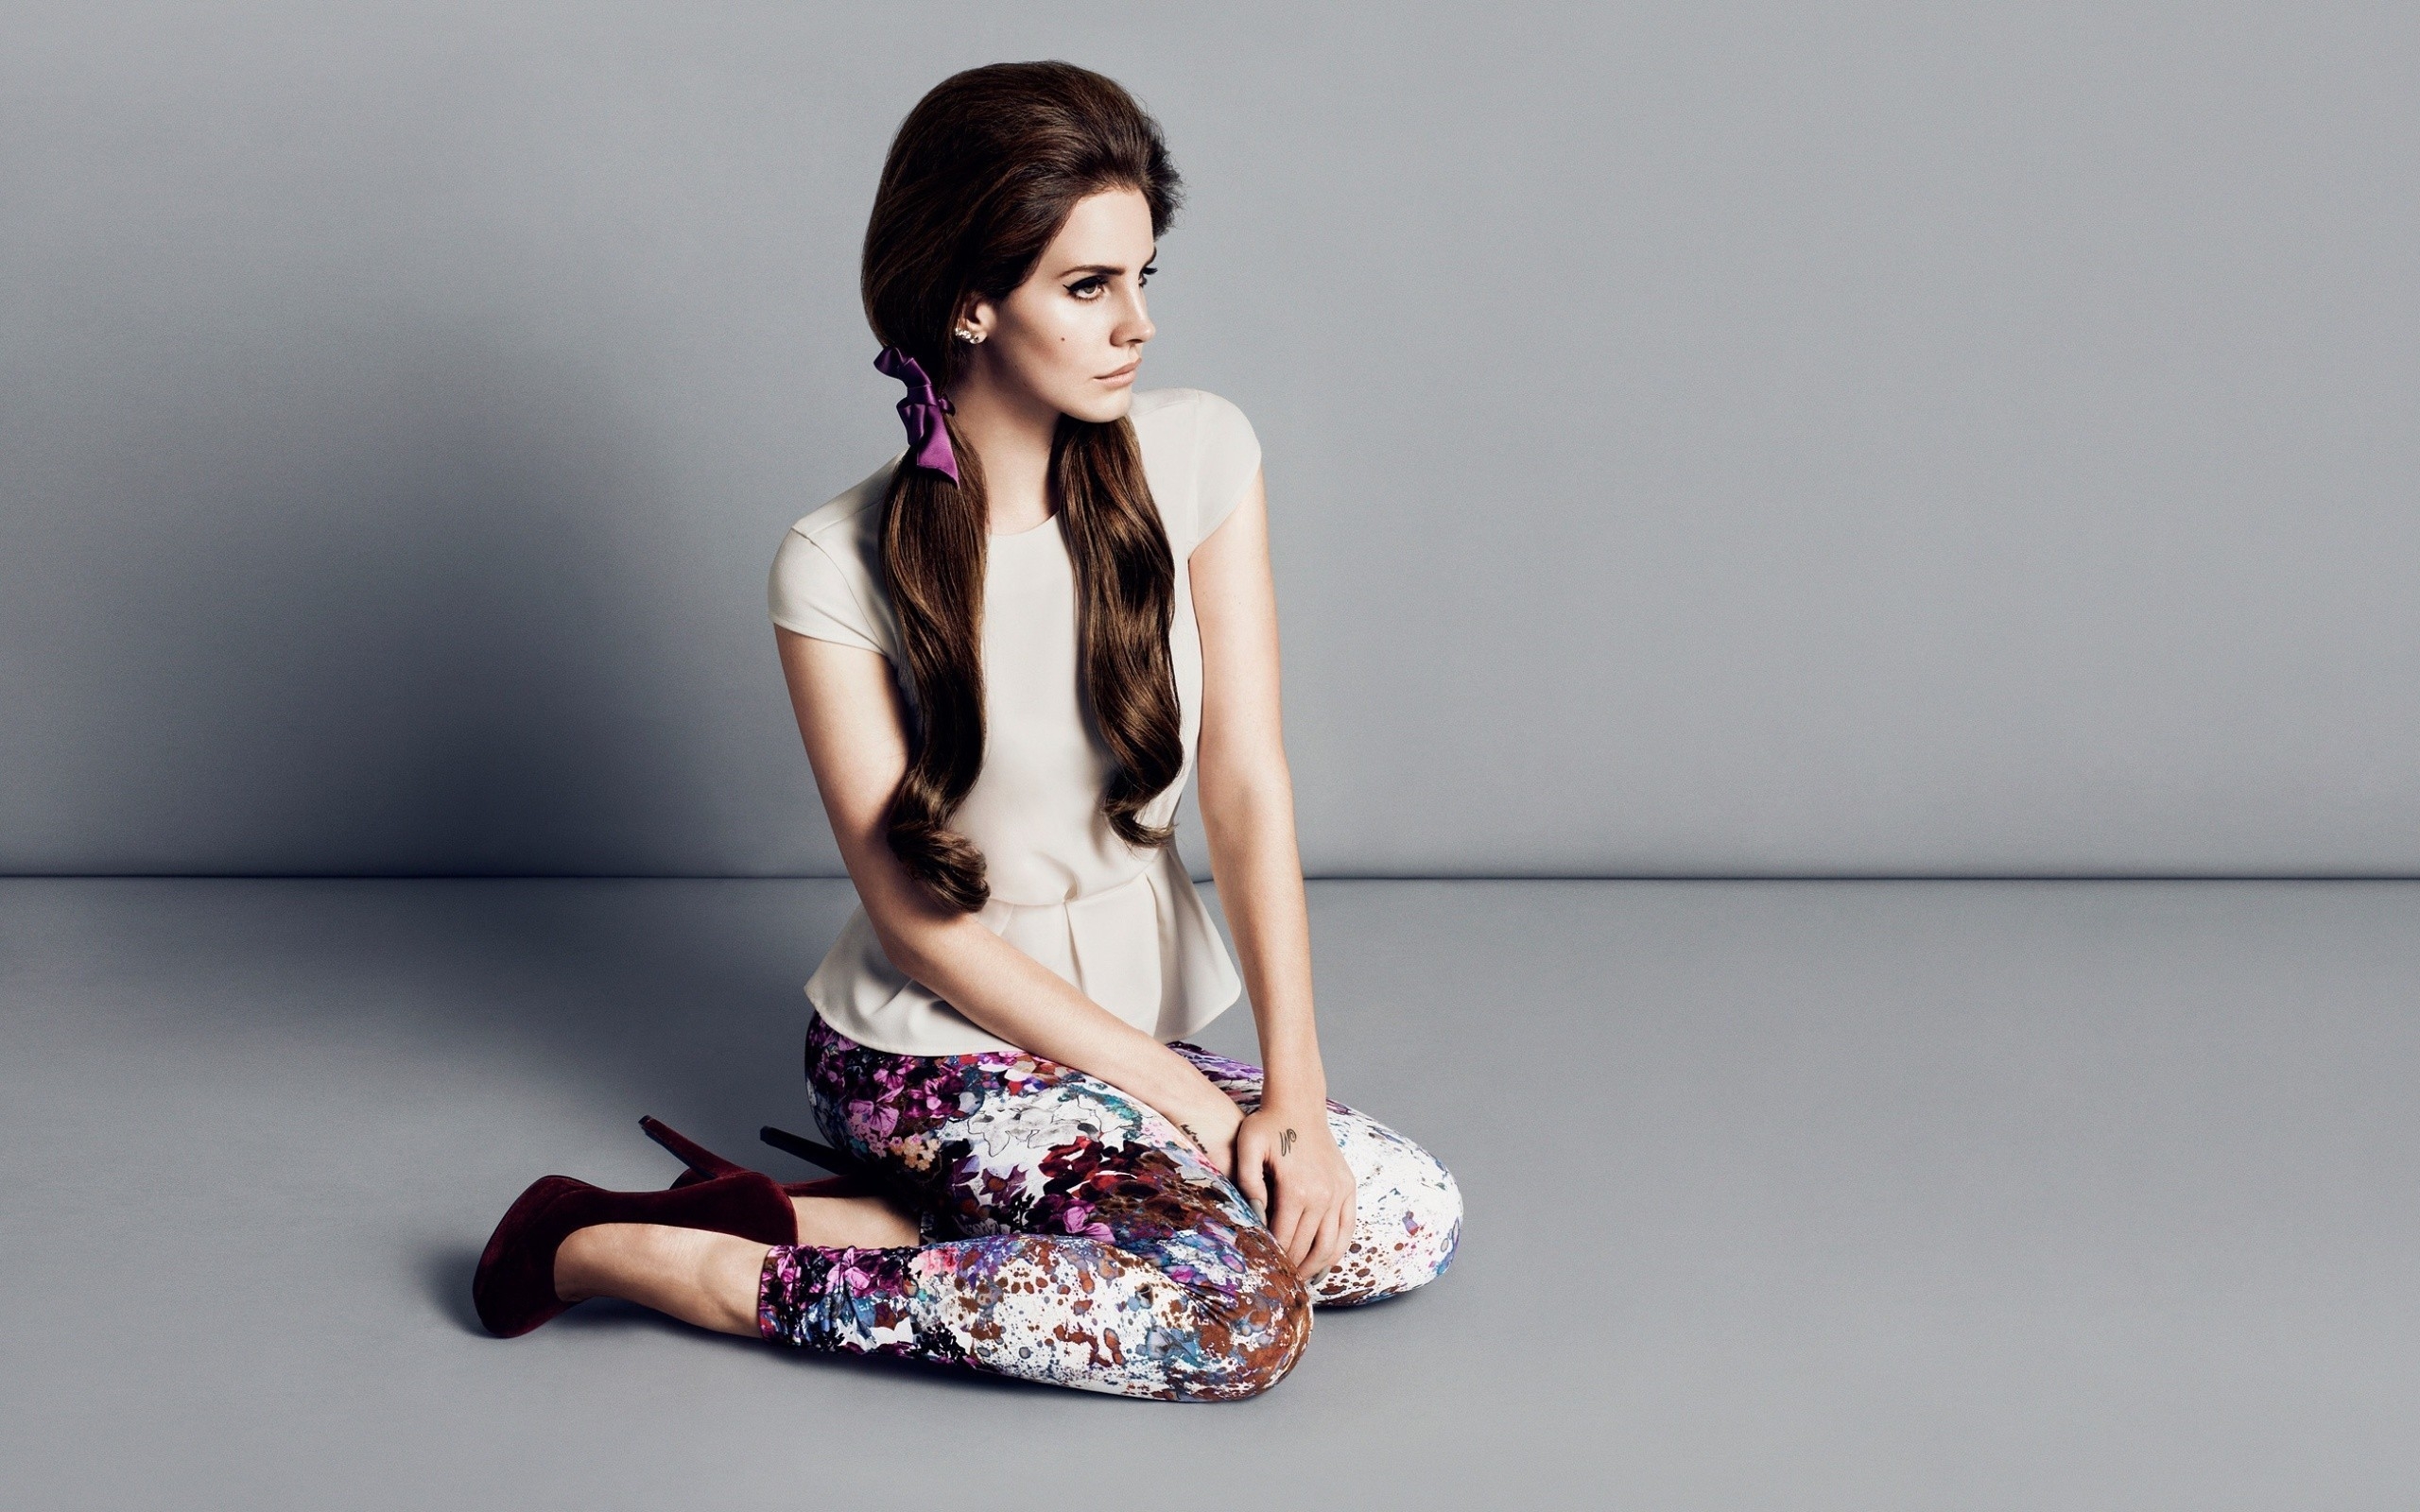 Lana Del Rey Cool for 2560 x 1600 widescreen resolution